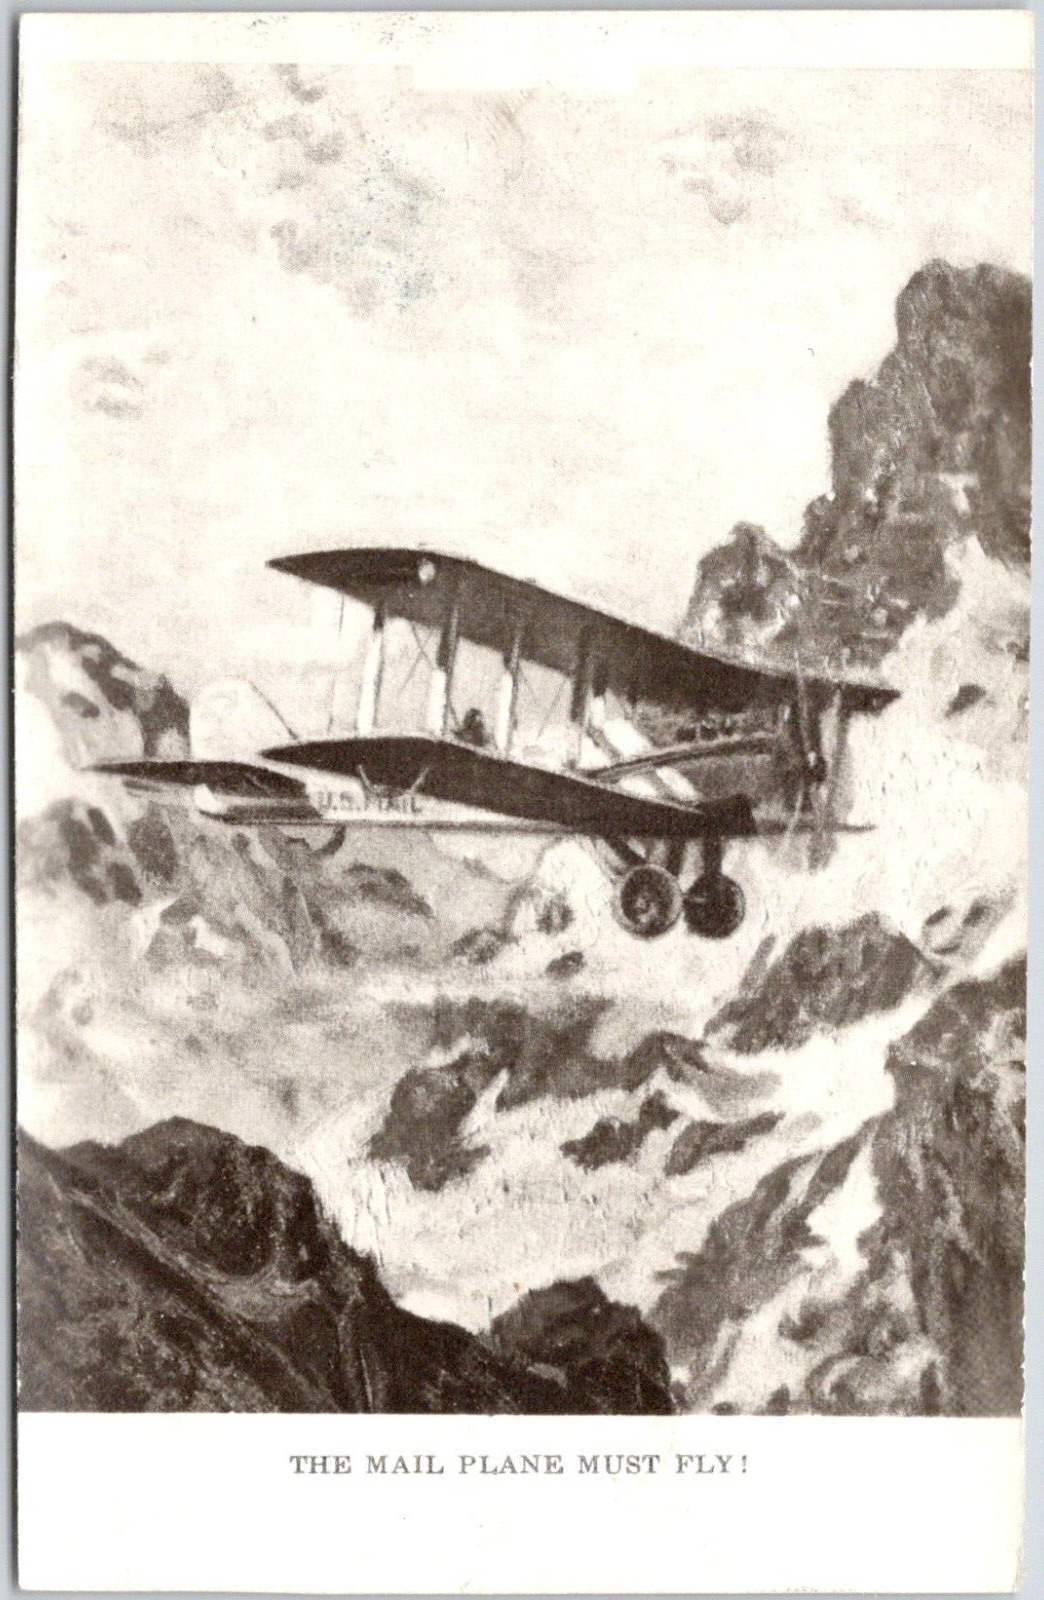 The Mail Plane Must Fly U. S. Mail Plane Flying over Mountains Postcard